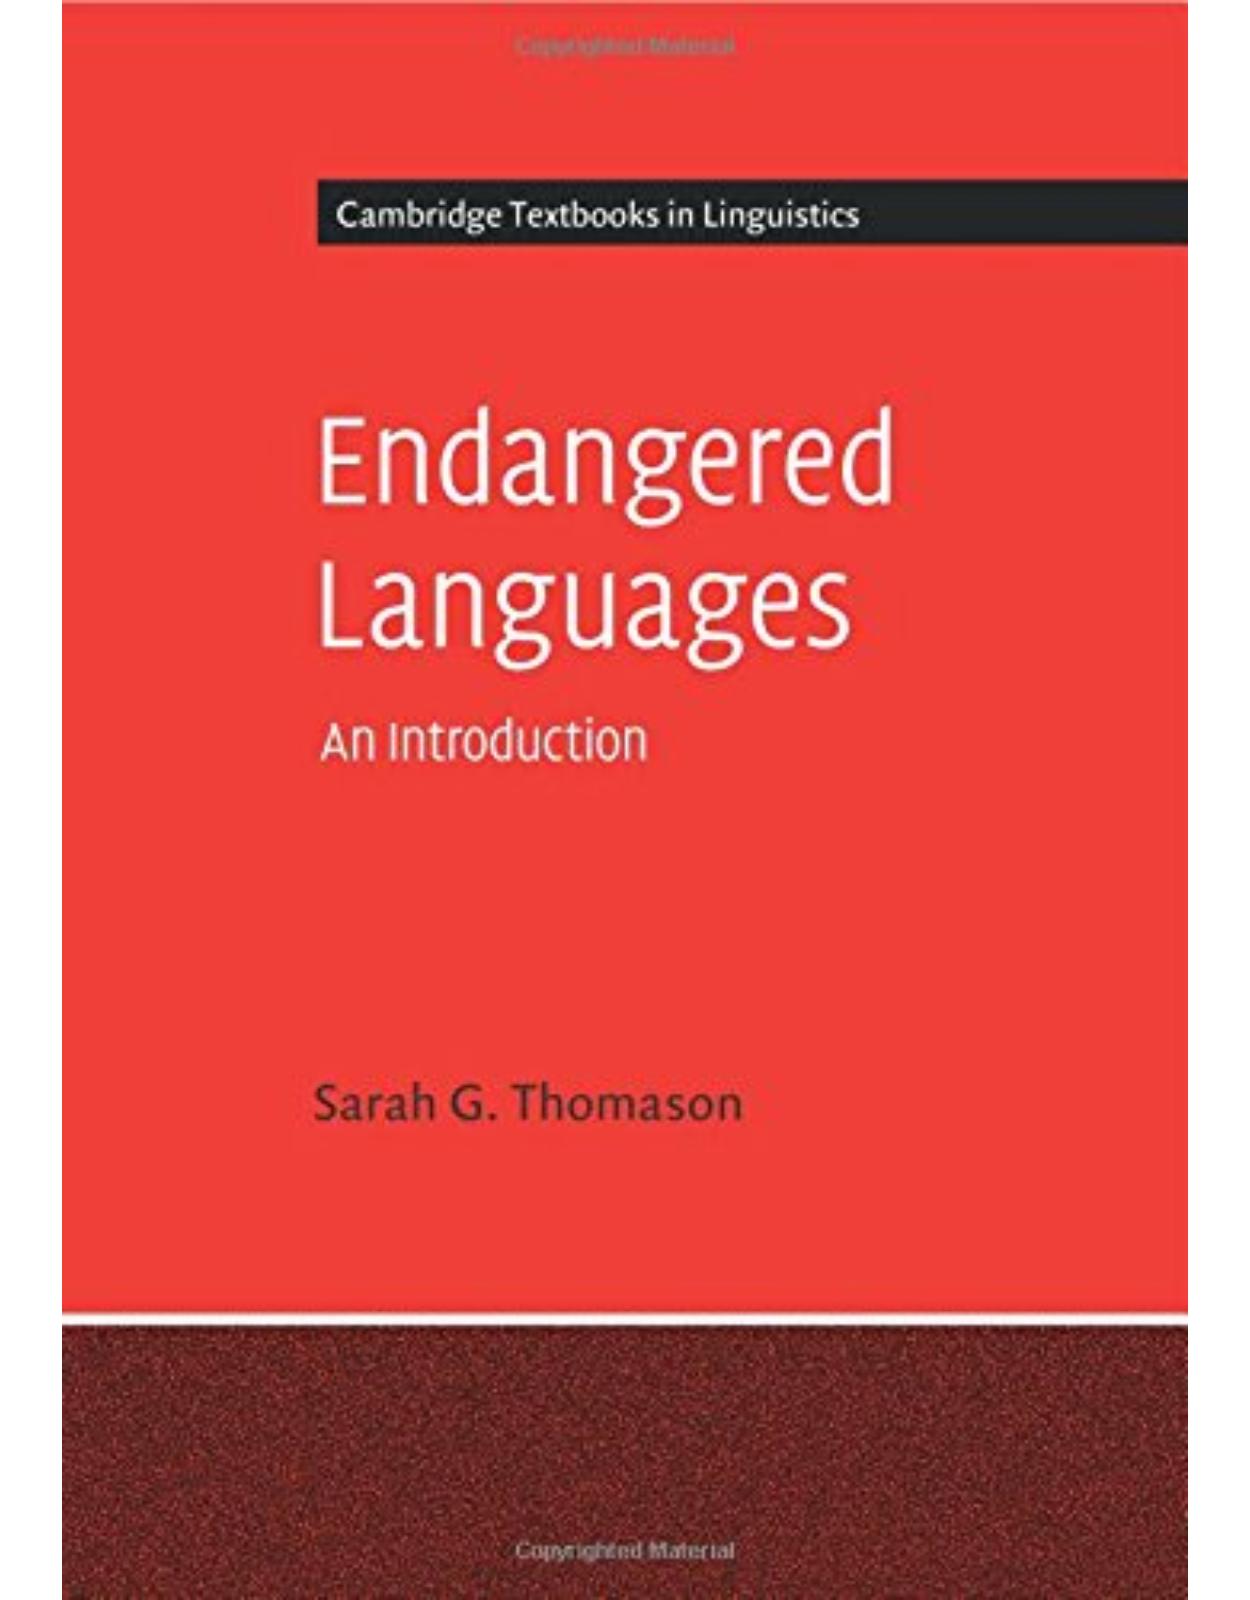 Endangered Languages: An Introduction (Cambridge Textbooks in Linguistics)